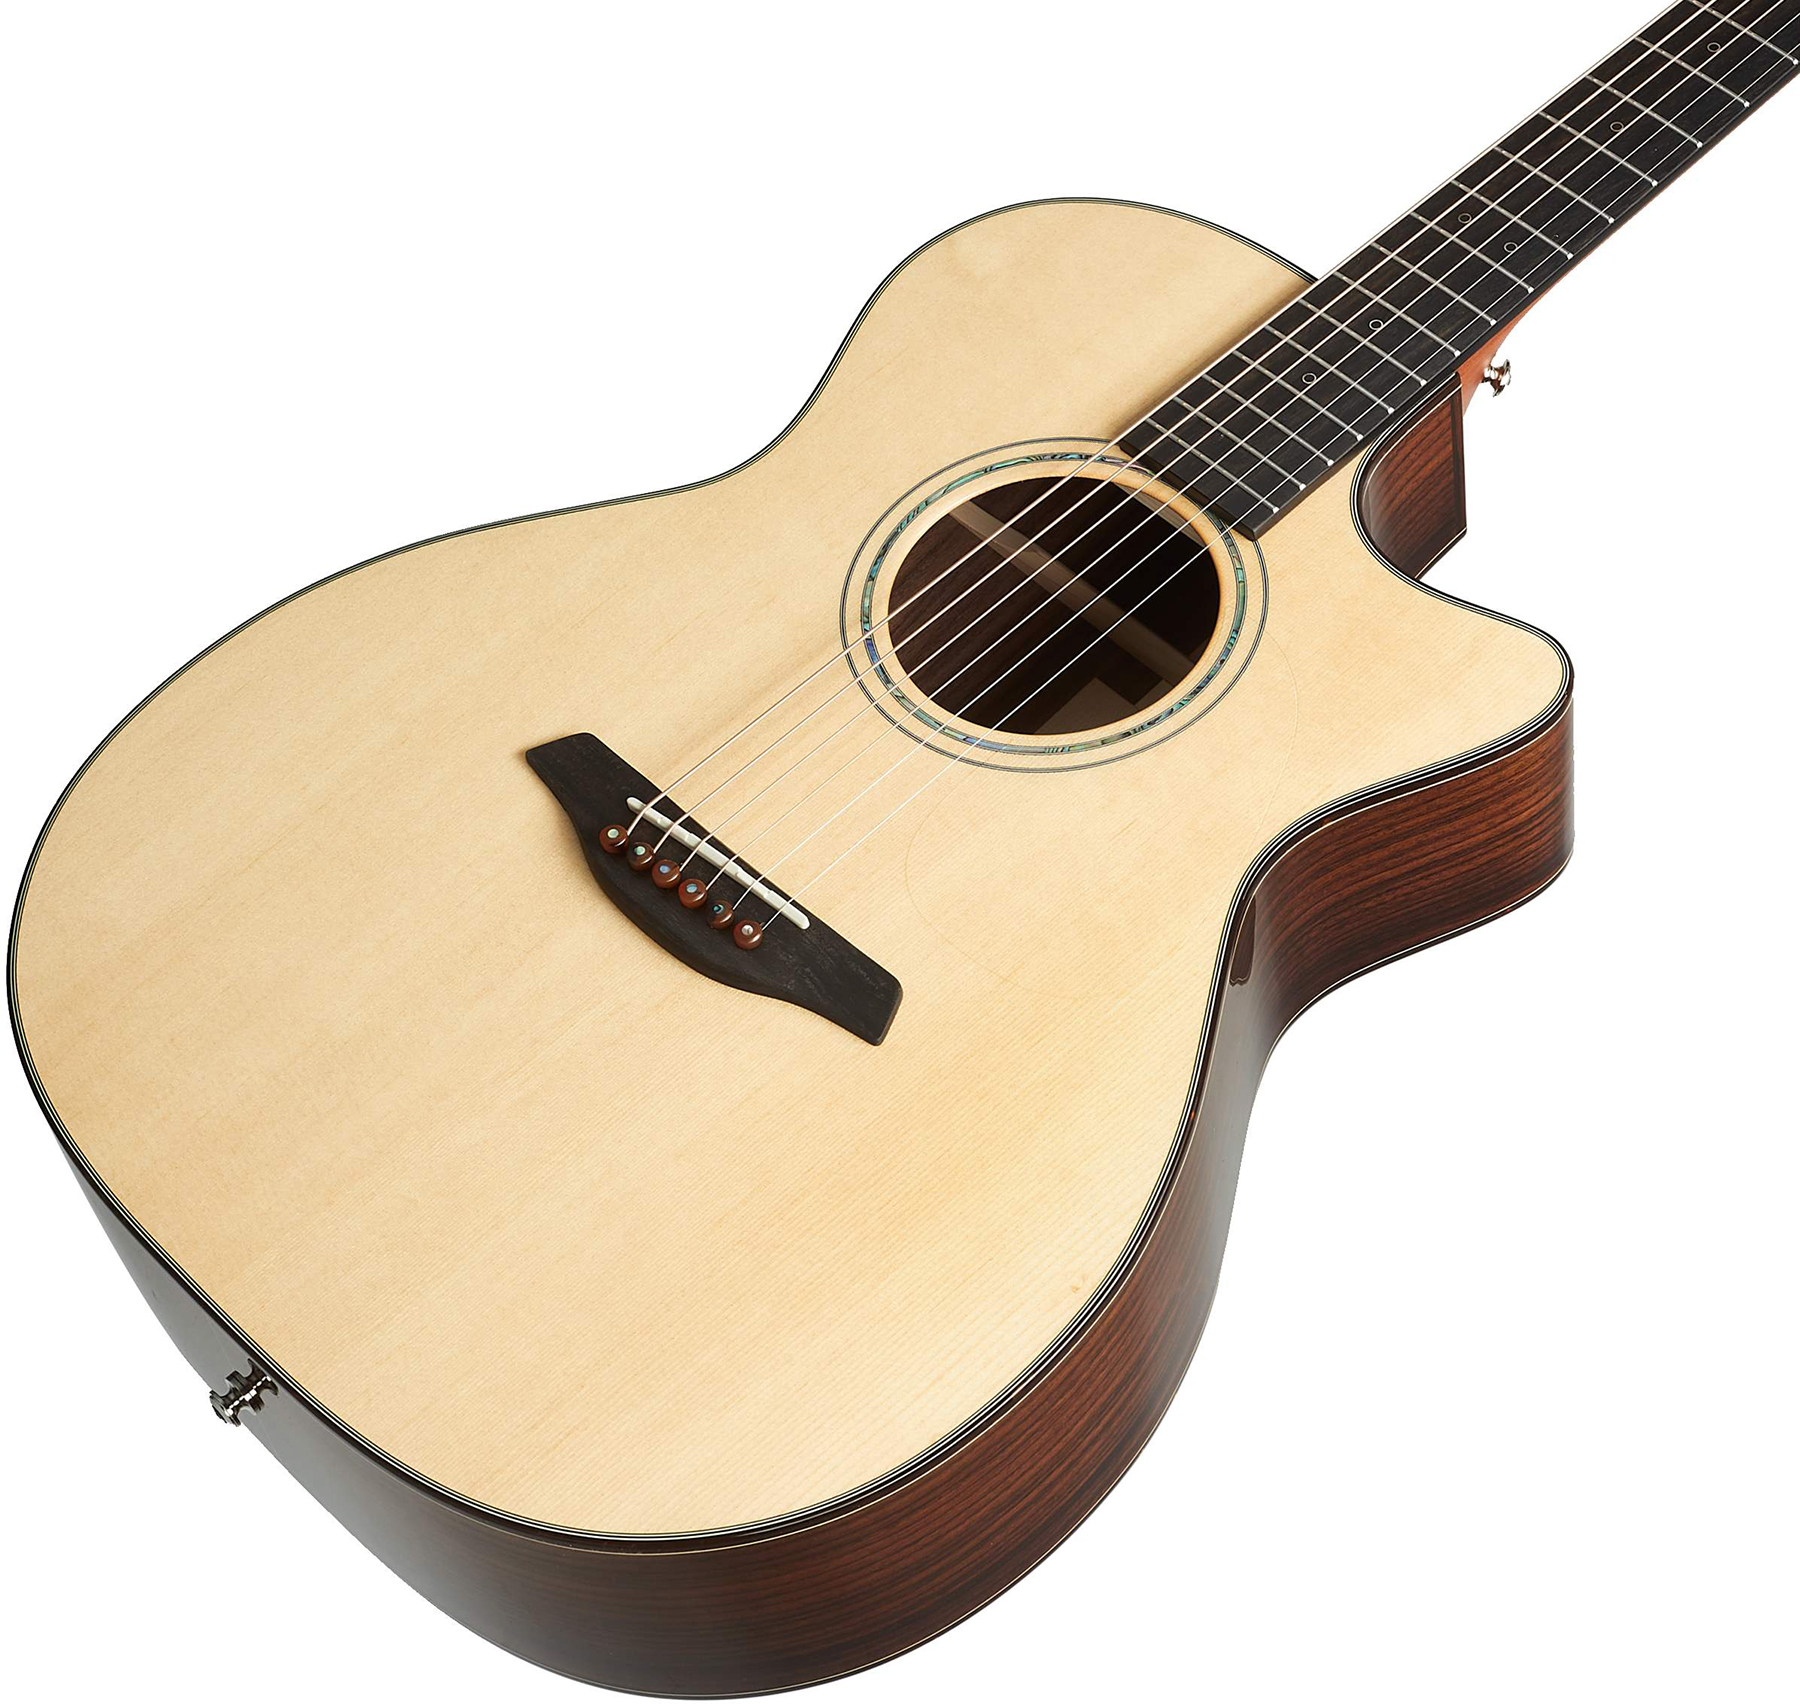 Furch Omc-sr Lrb1 Yellow Orchestra Model Epicea Palissandre Eb - Natural Full-pore - Guitarra electro acustica - Variation 2